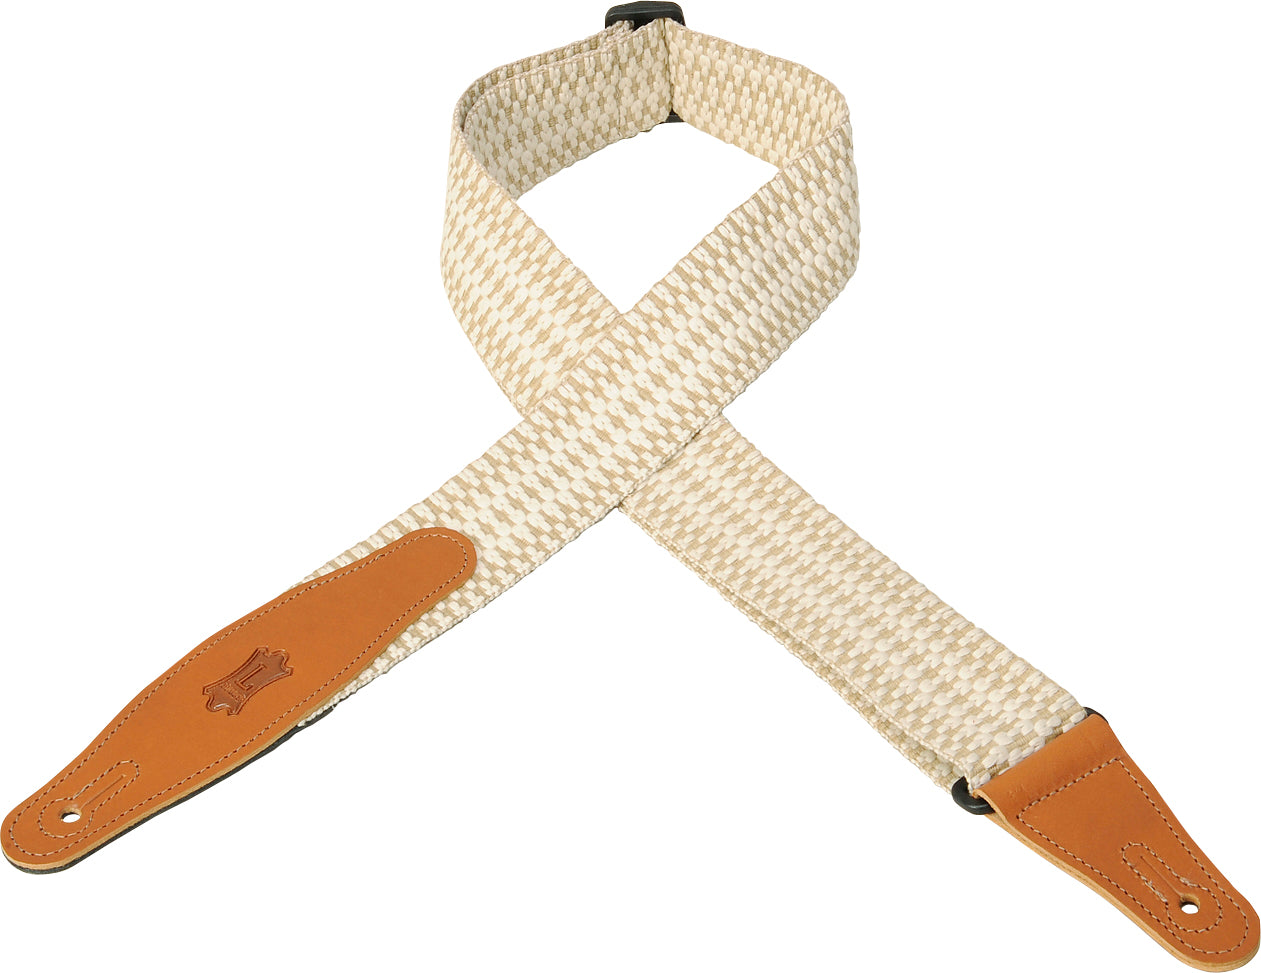 LEVY'S 2" WOVEN GUITAR STRAP- NATURAL